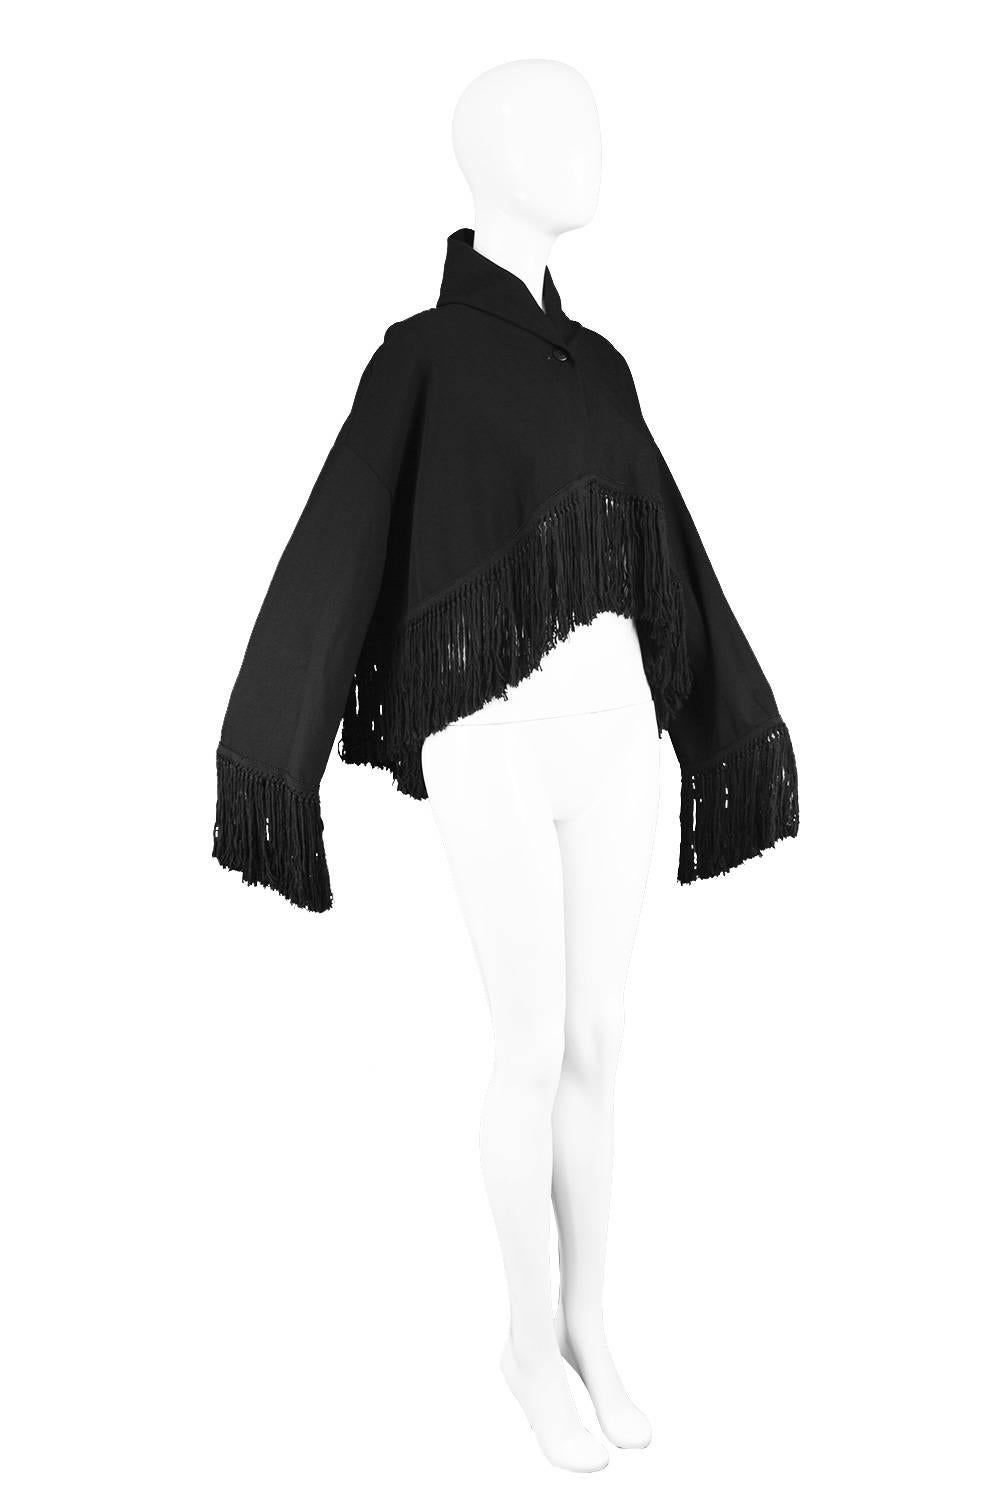 Romeo Gigli for Callaghan Knotted Fringed Black Stretch Wool Jacket, 1990s  For Sale 1